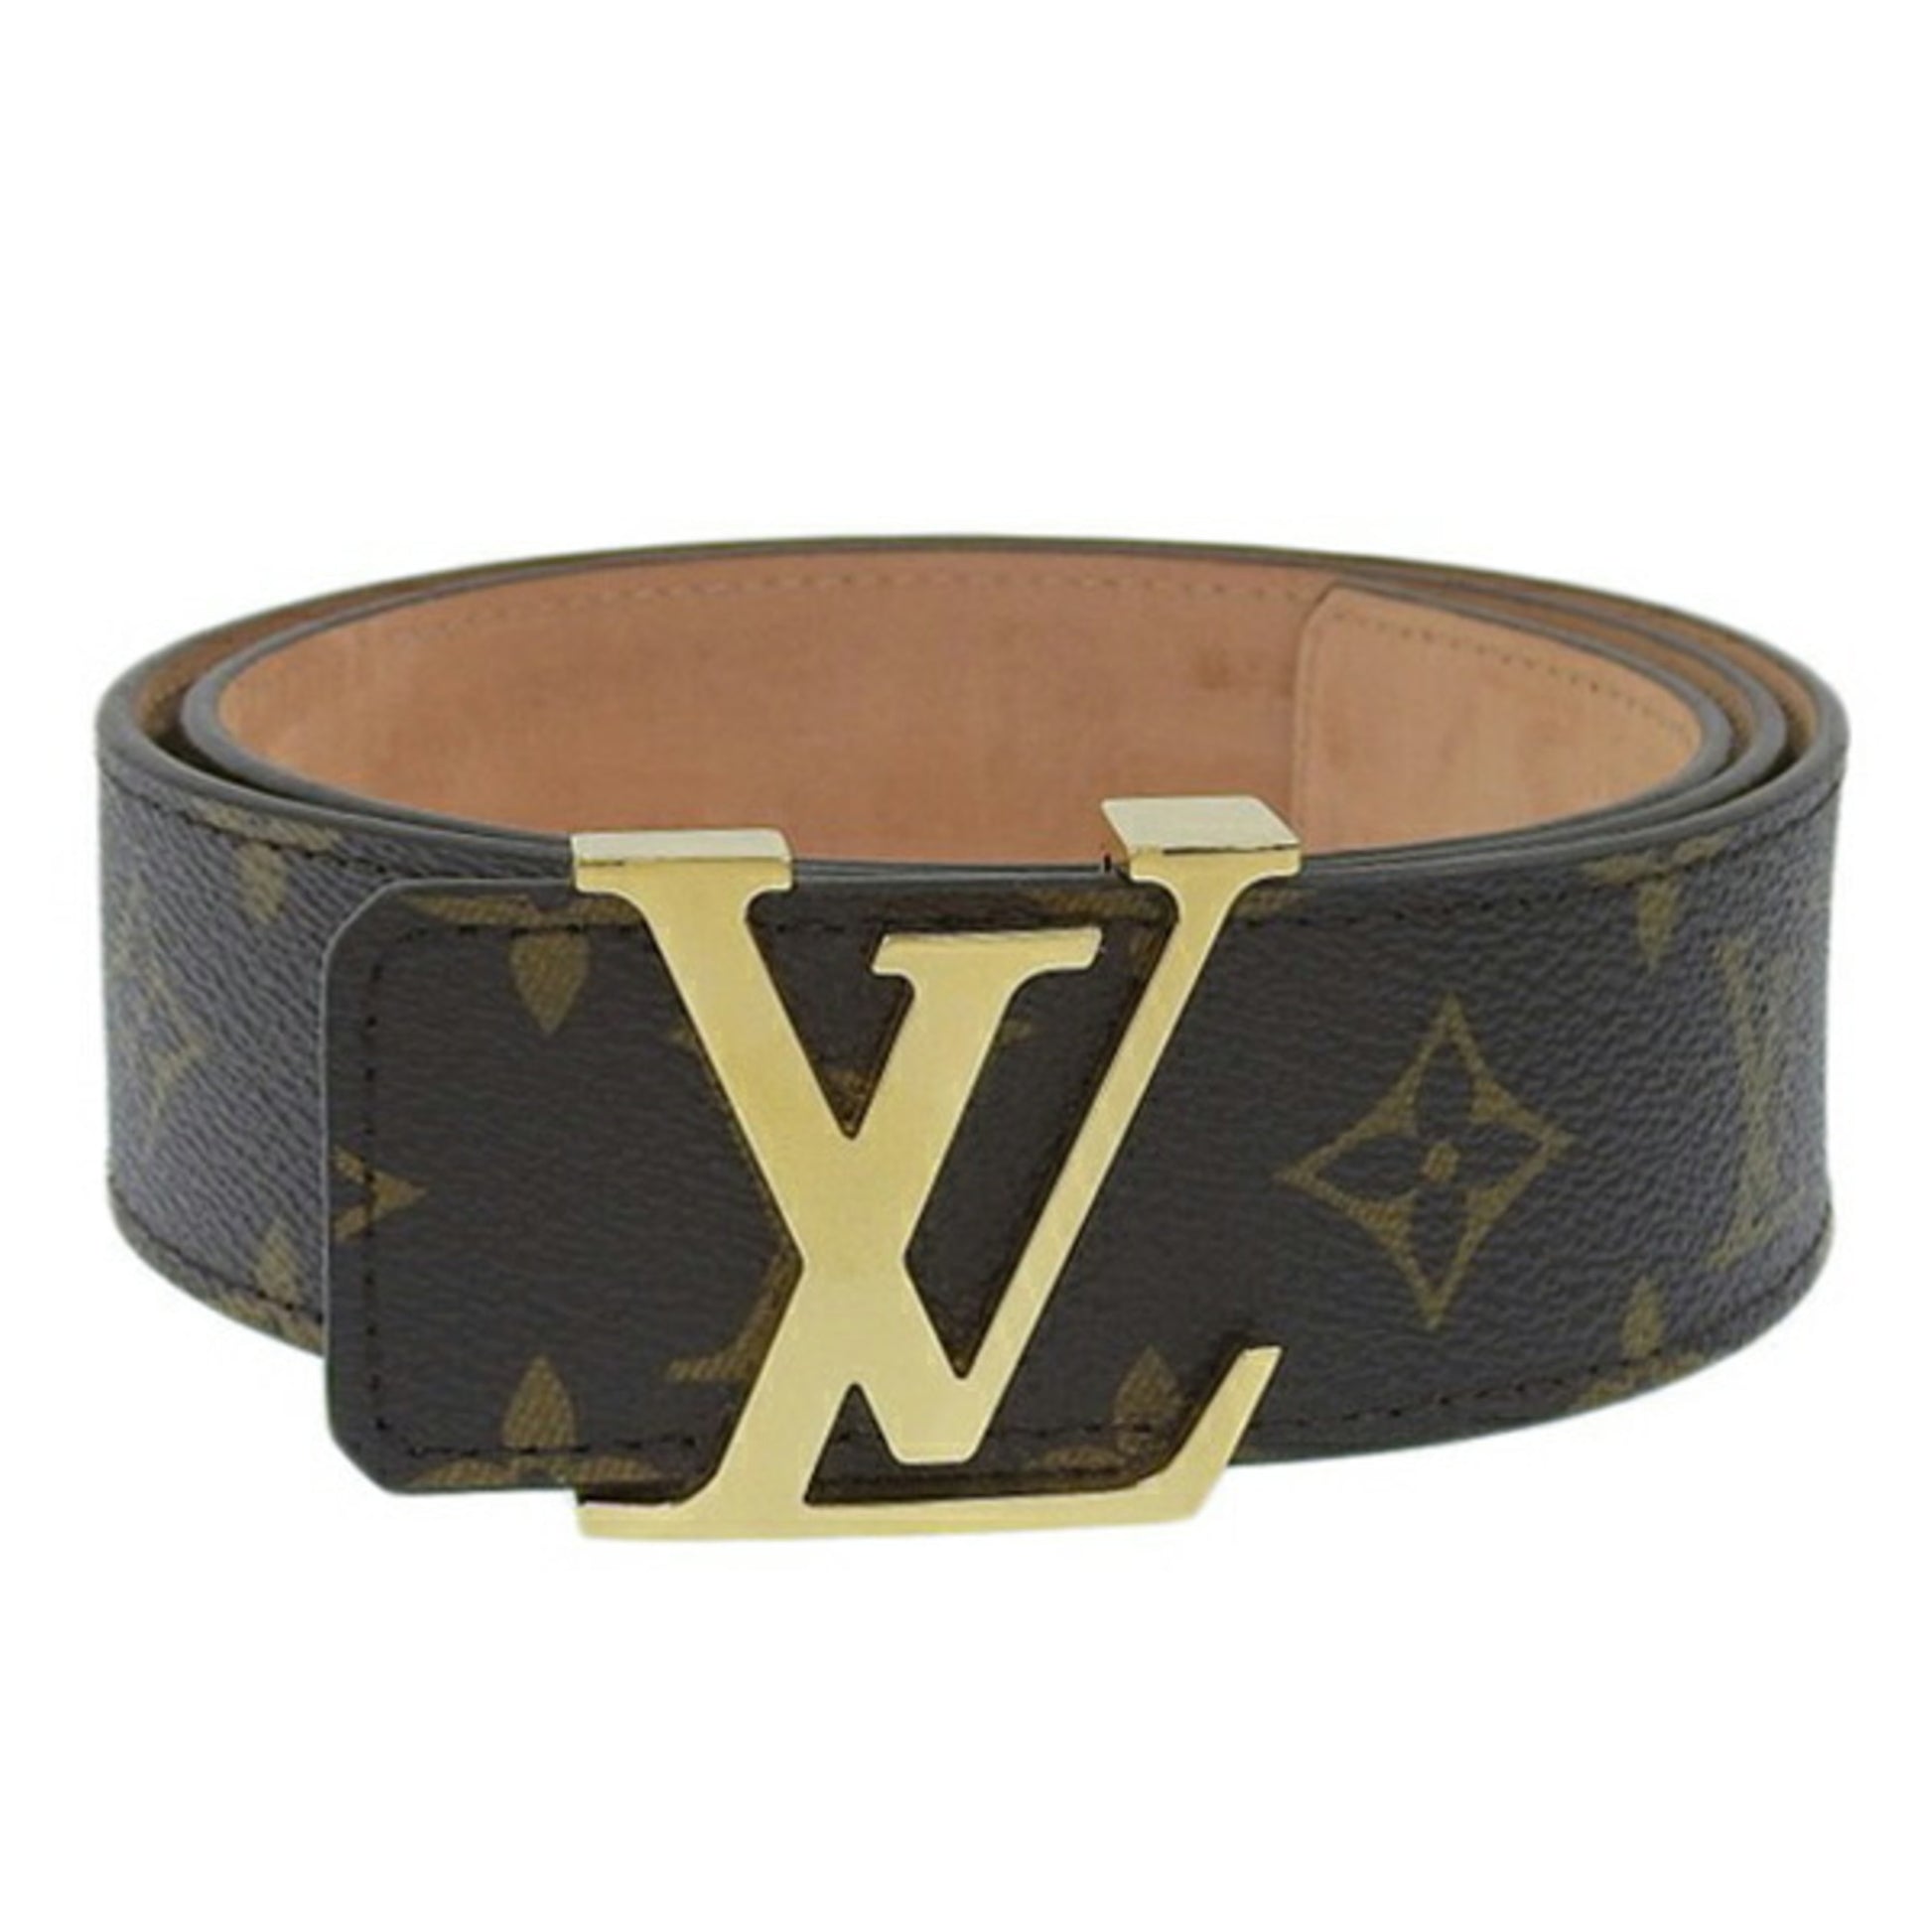 Louis Vuitton - Authenticated Shape Belt - Leather Brown for Men, Never Worn